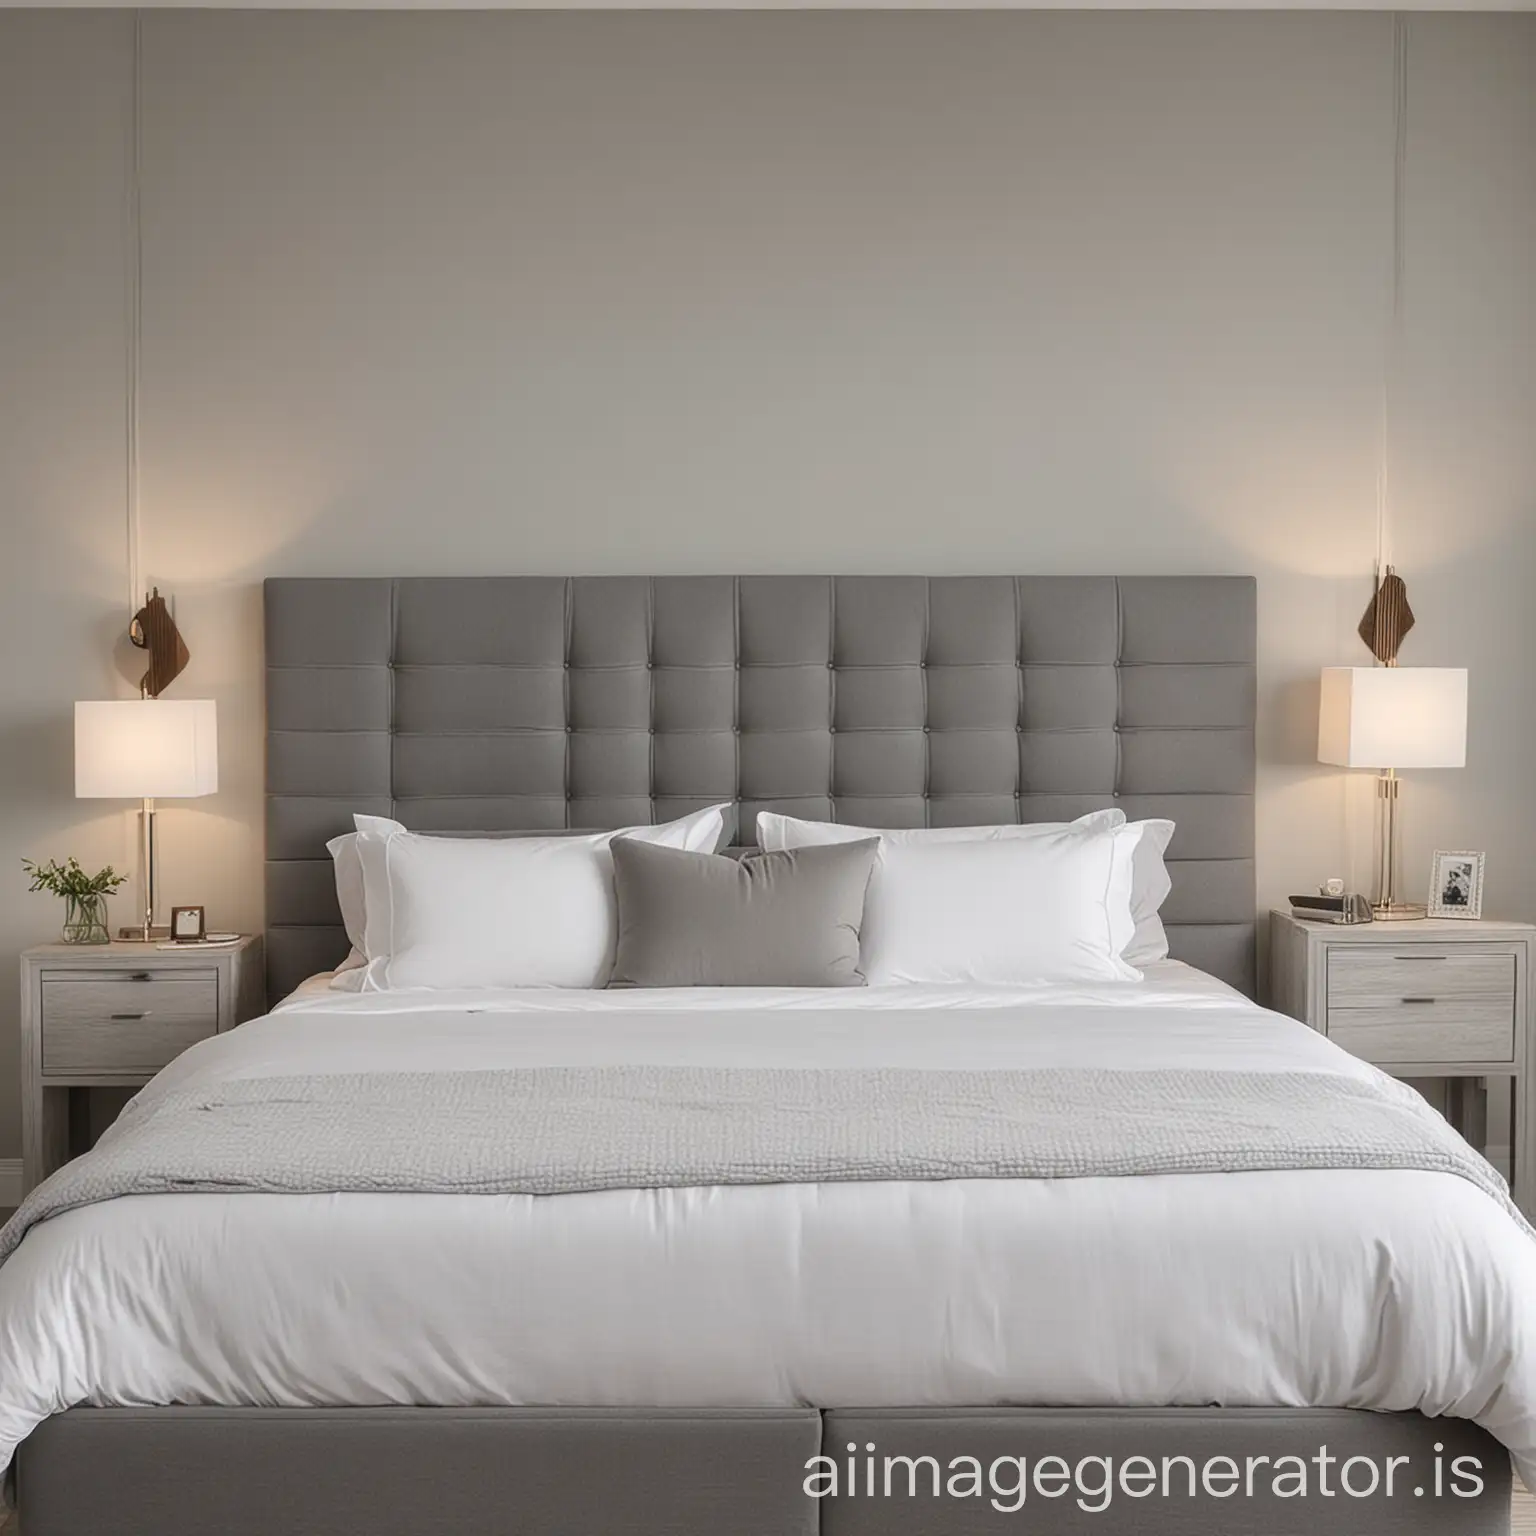 King size White bed with grey rectangular headboard and side tables against large blank wall